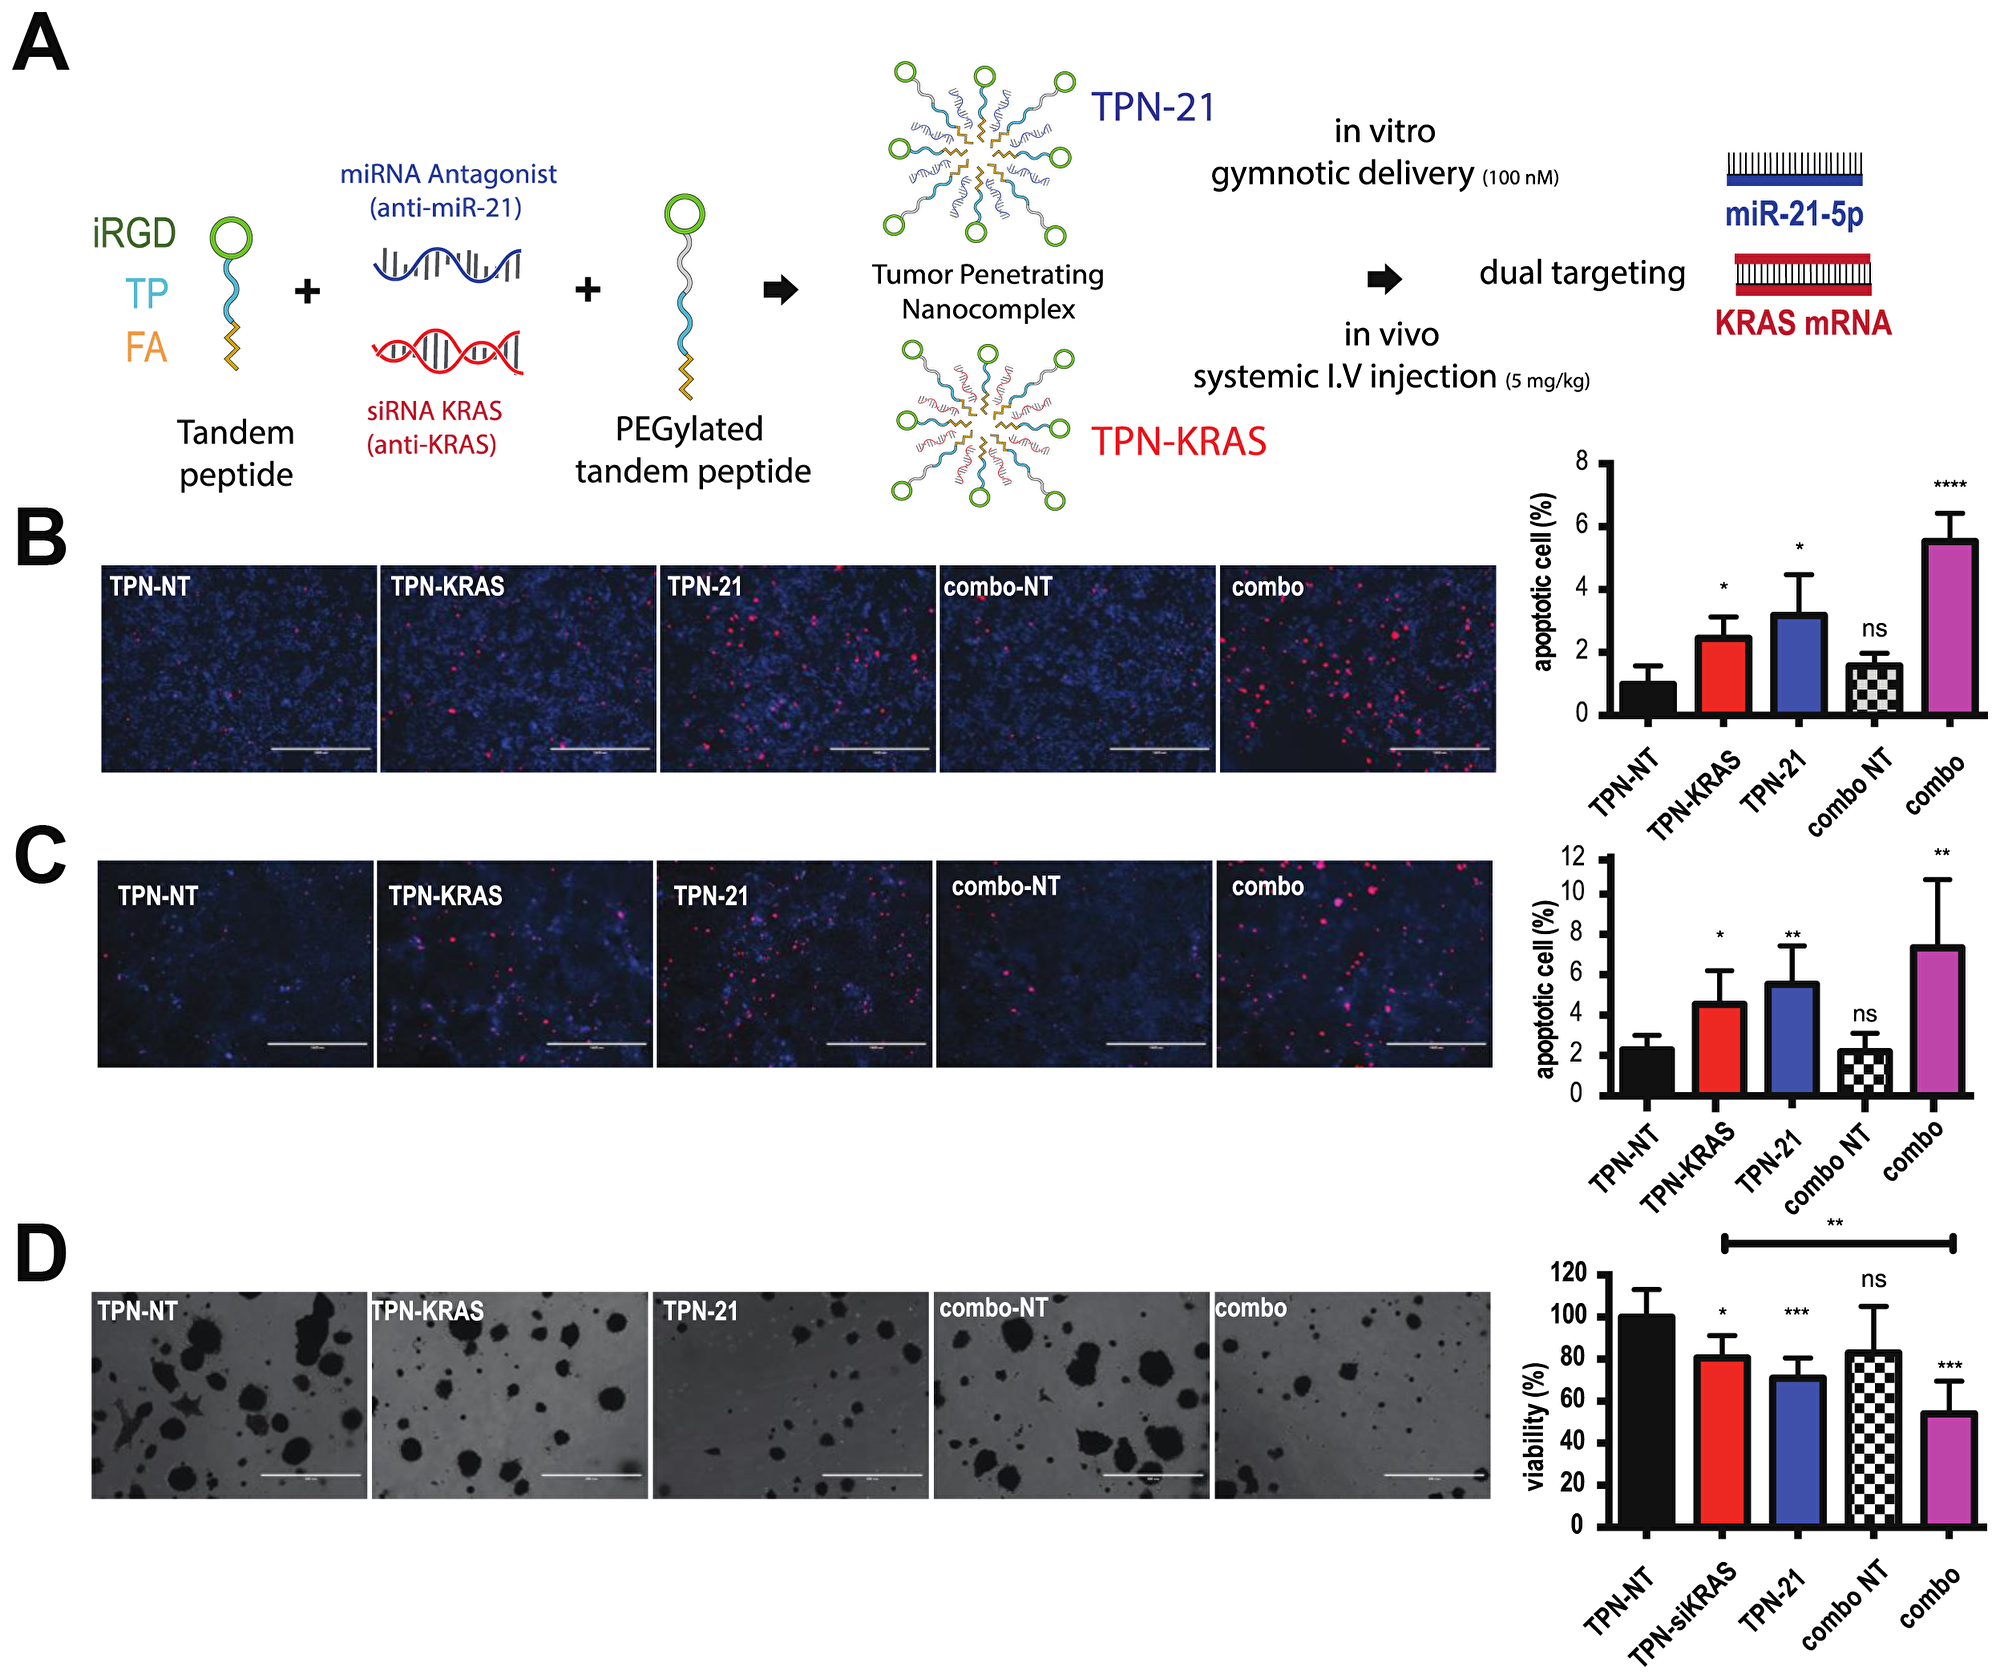 Combining antimiR-21 and si-KRAS increases apoptosis and enhances the anti-proliferative effect in PDAC cells and organoids.